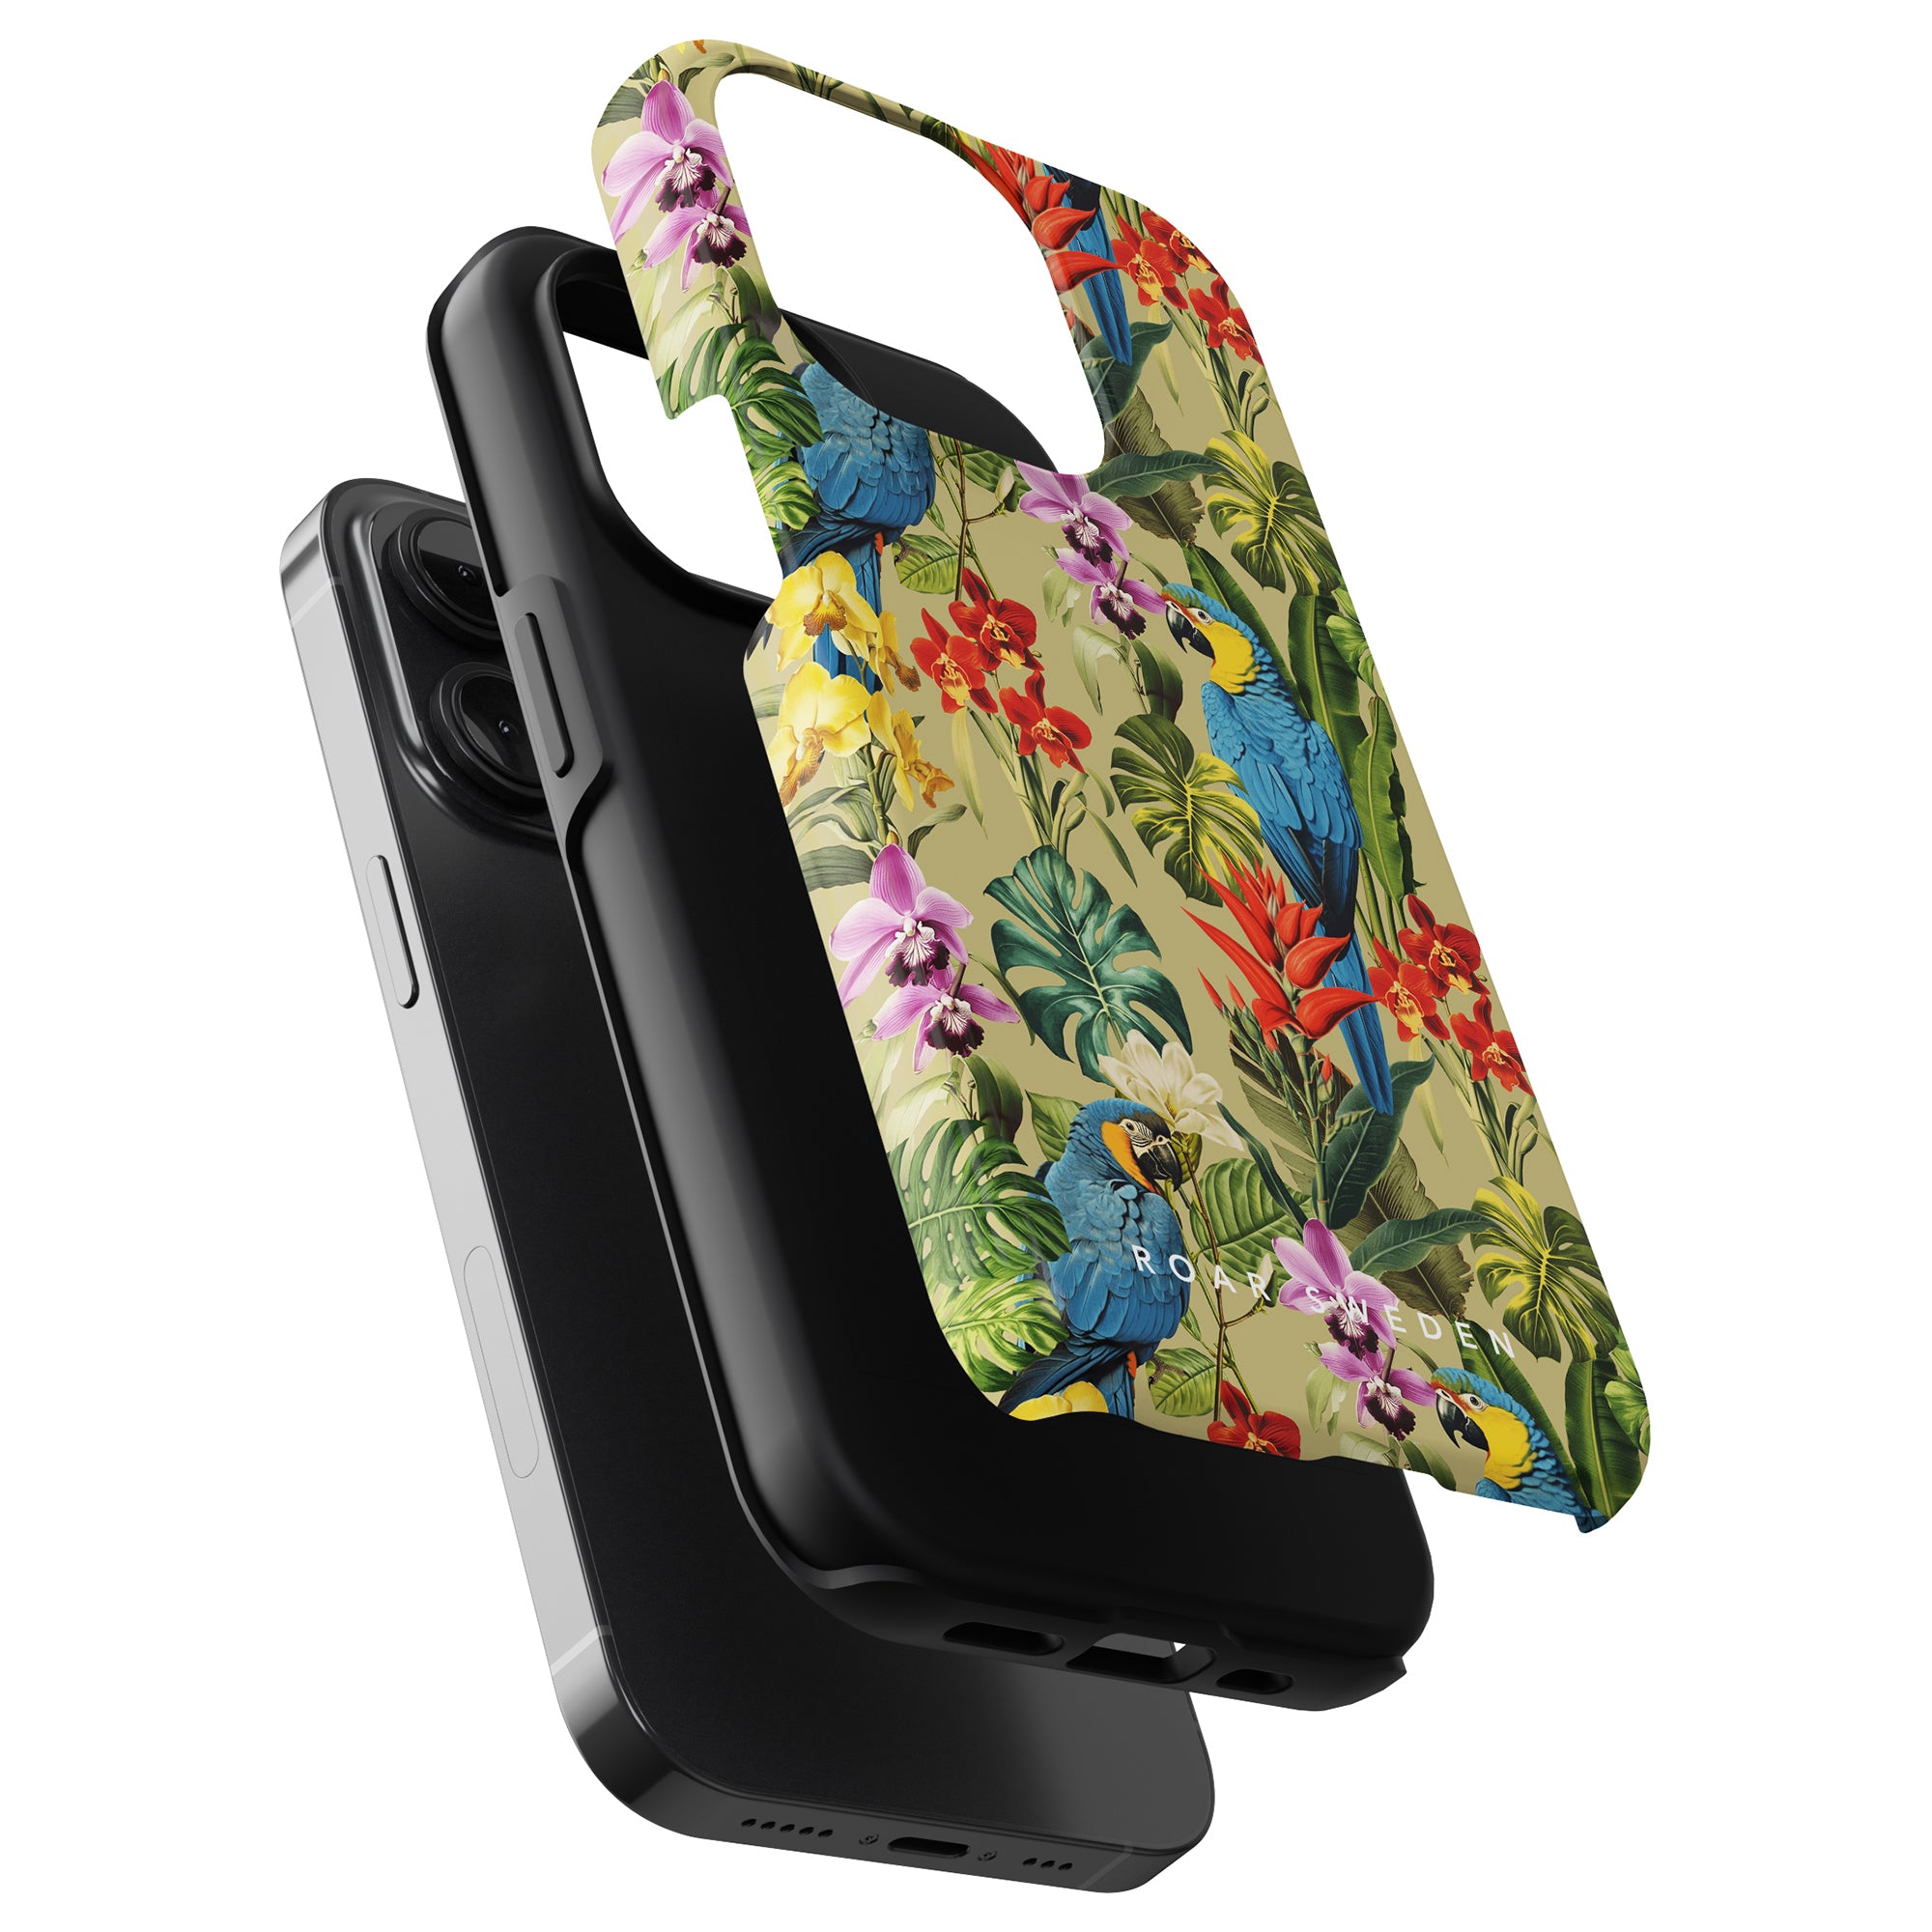 Two smartphone cases are stacked together; one is a plain black tåligt mobilskal, and the other features a colorful tropical design with birds and flowers from our Verdant Beauty - Tough Case.